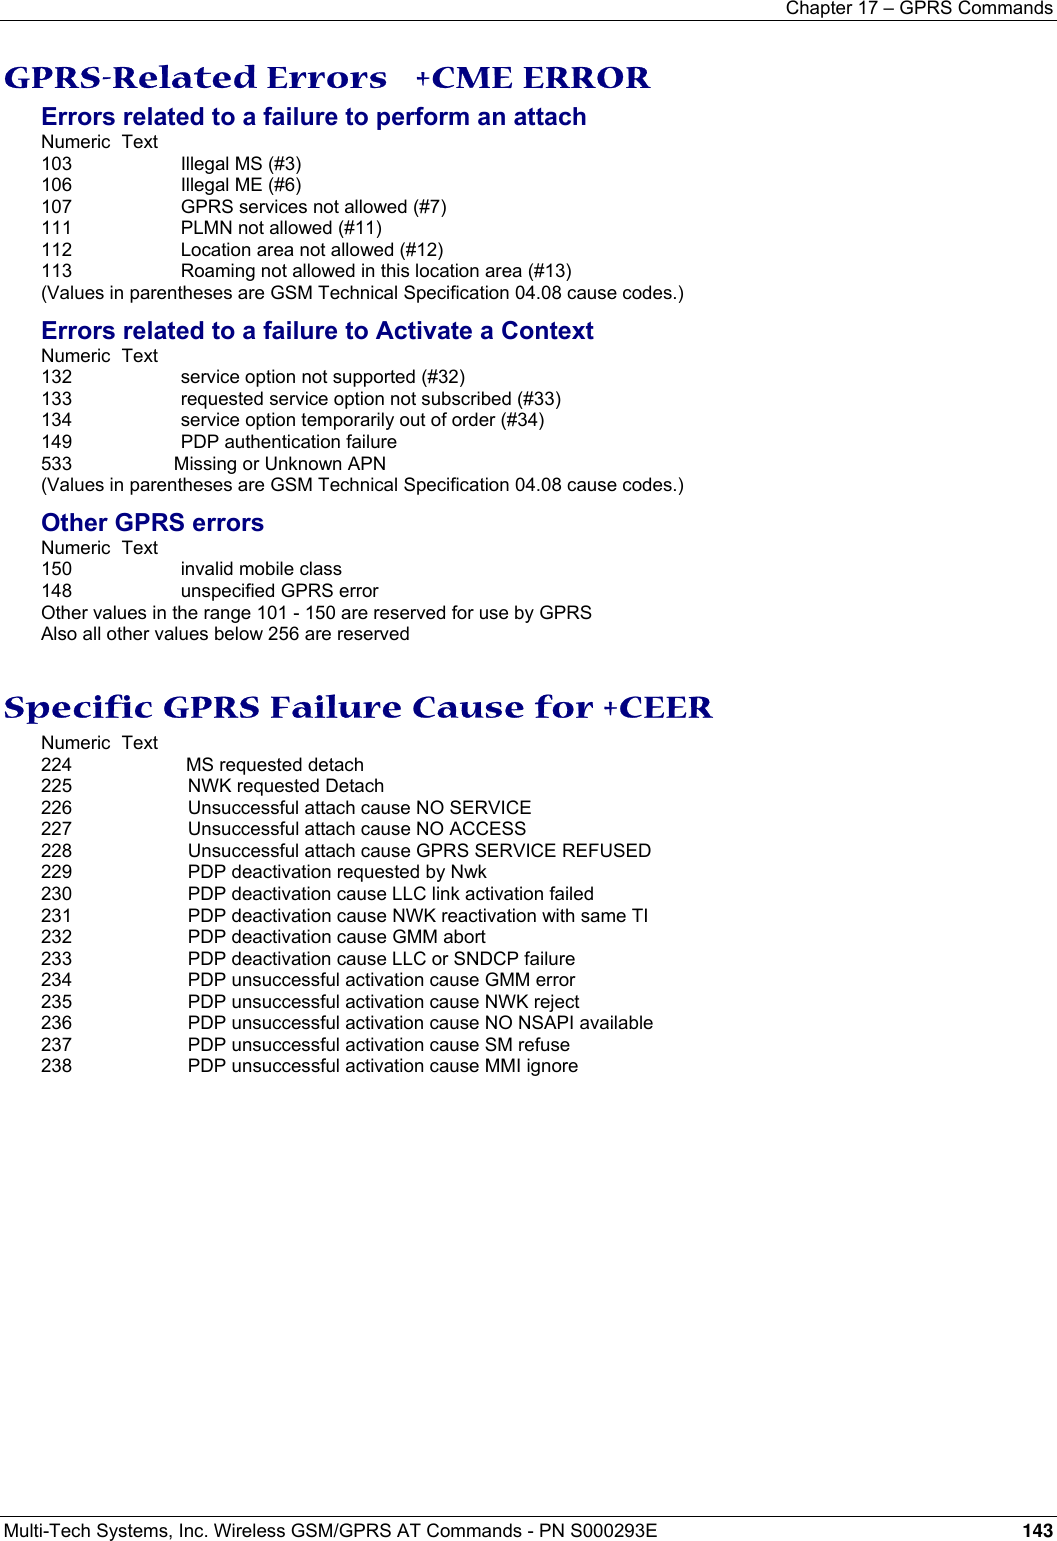 Chapter 17 – GPRS Commands  Multi-Tech Systems, Inc. Wireless GSM/GPRS AT Commands - PN S000293E 143  GPRS-Related Errors   +CME ERROR Errors related to a failure to perform an attach Numeric Text 103    Illegal MS (#3) 106    Illegal ME (#6) 107    GPRS services not allowed (#7) 111    PLMN not allowed (#11) 112    Location area not allowed (#12) 113    Roaming not allowed in this location area (#13) (Values in parentheses are GSM Technical Specification 04.08 cause codes.) Errors related to a failure to Activate a Context Numeric Text 132    service option not supported (#32) 133    requested service option not subscribed (#33) 134    service option temporarily out of order (#34) 149    PDP authentication failure 533            Missing or Unknown APN  (Values in parentheses are GSM Technical Specification 04.08 cause codes.) Other GPRS errors Numeric Text 150    invalid mobile class 148    unspecified GPRS error Other values in the range 101 - 150 are reserved for use by GPRS Also all other values below 256 are reserved   Specific GPRS Failure Cause for +CEER Numeric Text 224              MS requested detach 225  NWK requested Detach 226  Unsuccessful attach cause NO SERVICE 227  Unsuccessful attach cause NO ACCESS 228  Unsuccessful attach cause GPRS SERVICE REFUSED 229  PDP deactivation requested by Nwk 230  PDP deactivation cause LLC link activation failed 231  PDP deactivation cause NWK reactivation with same TI 232  PDP deactivation cause GMM abort 233  PDP deactivation cause LLC or SNDCP failure 234  PDP unsuccessful activation cause GMM error 235  PDP unsuccessful activation cause NWK reject 236  PDP unsuccessful activation cause NO NSAPI available 237  PDP unsuccessful activation cause SM refuse 238  PDP unsuccessful activation cause MMI ignore  